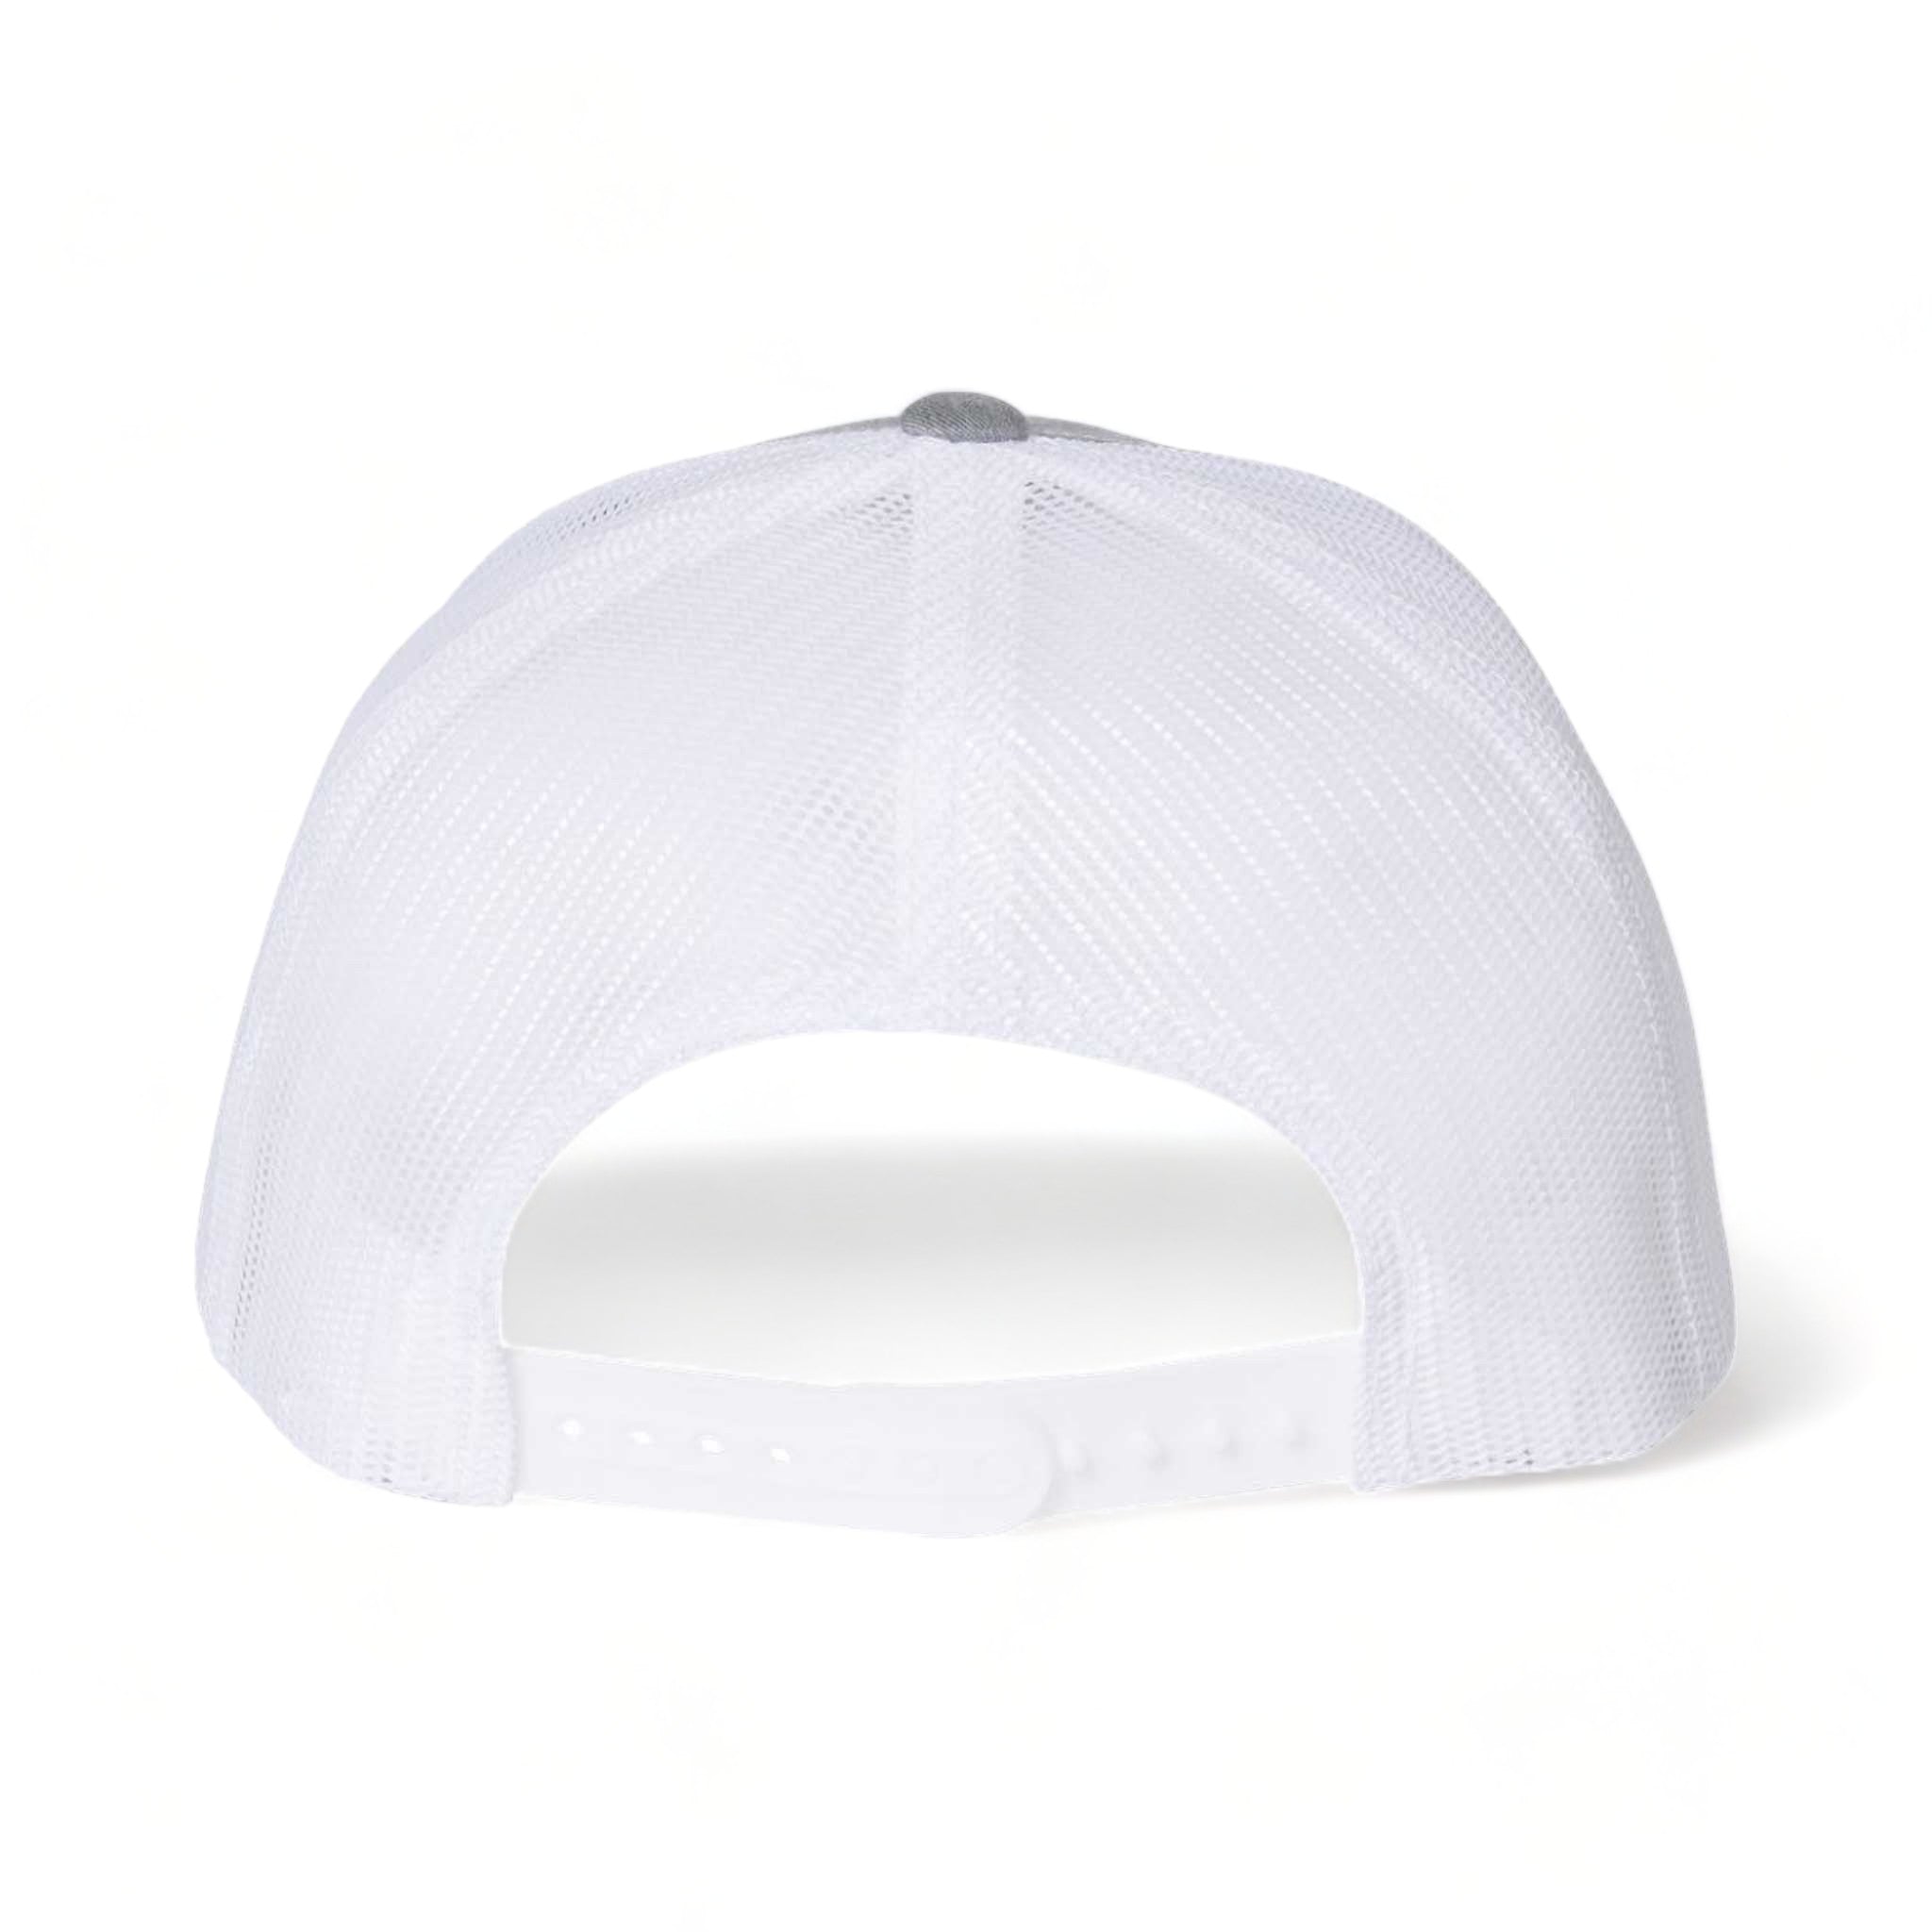 Back view of YP Classics 6606 custom hat in heather grey and white